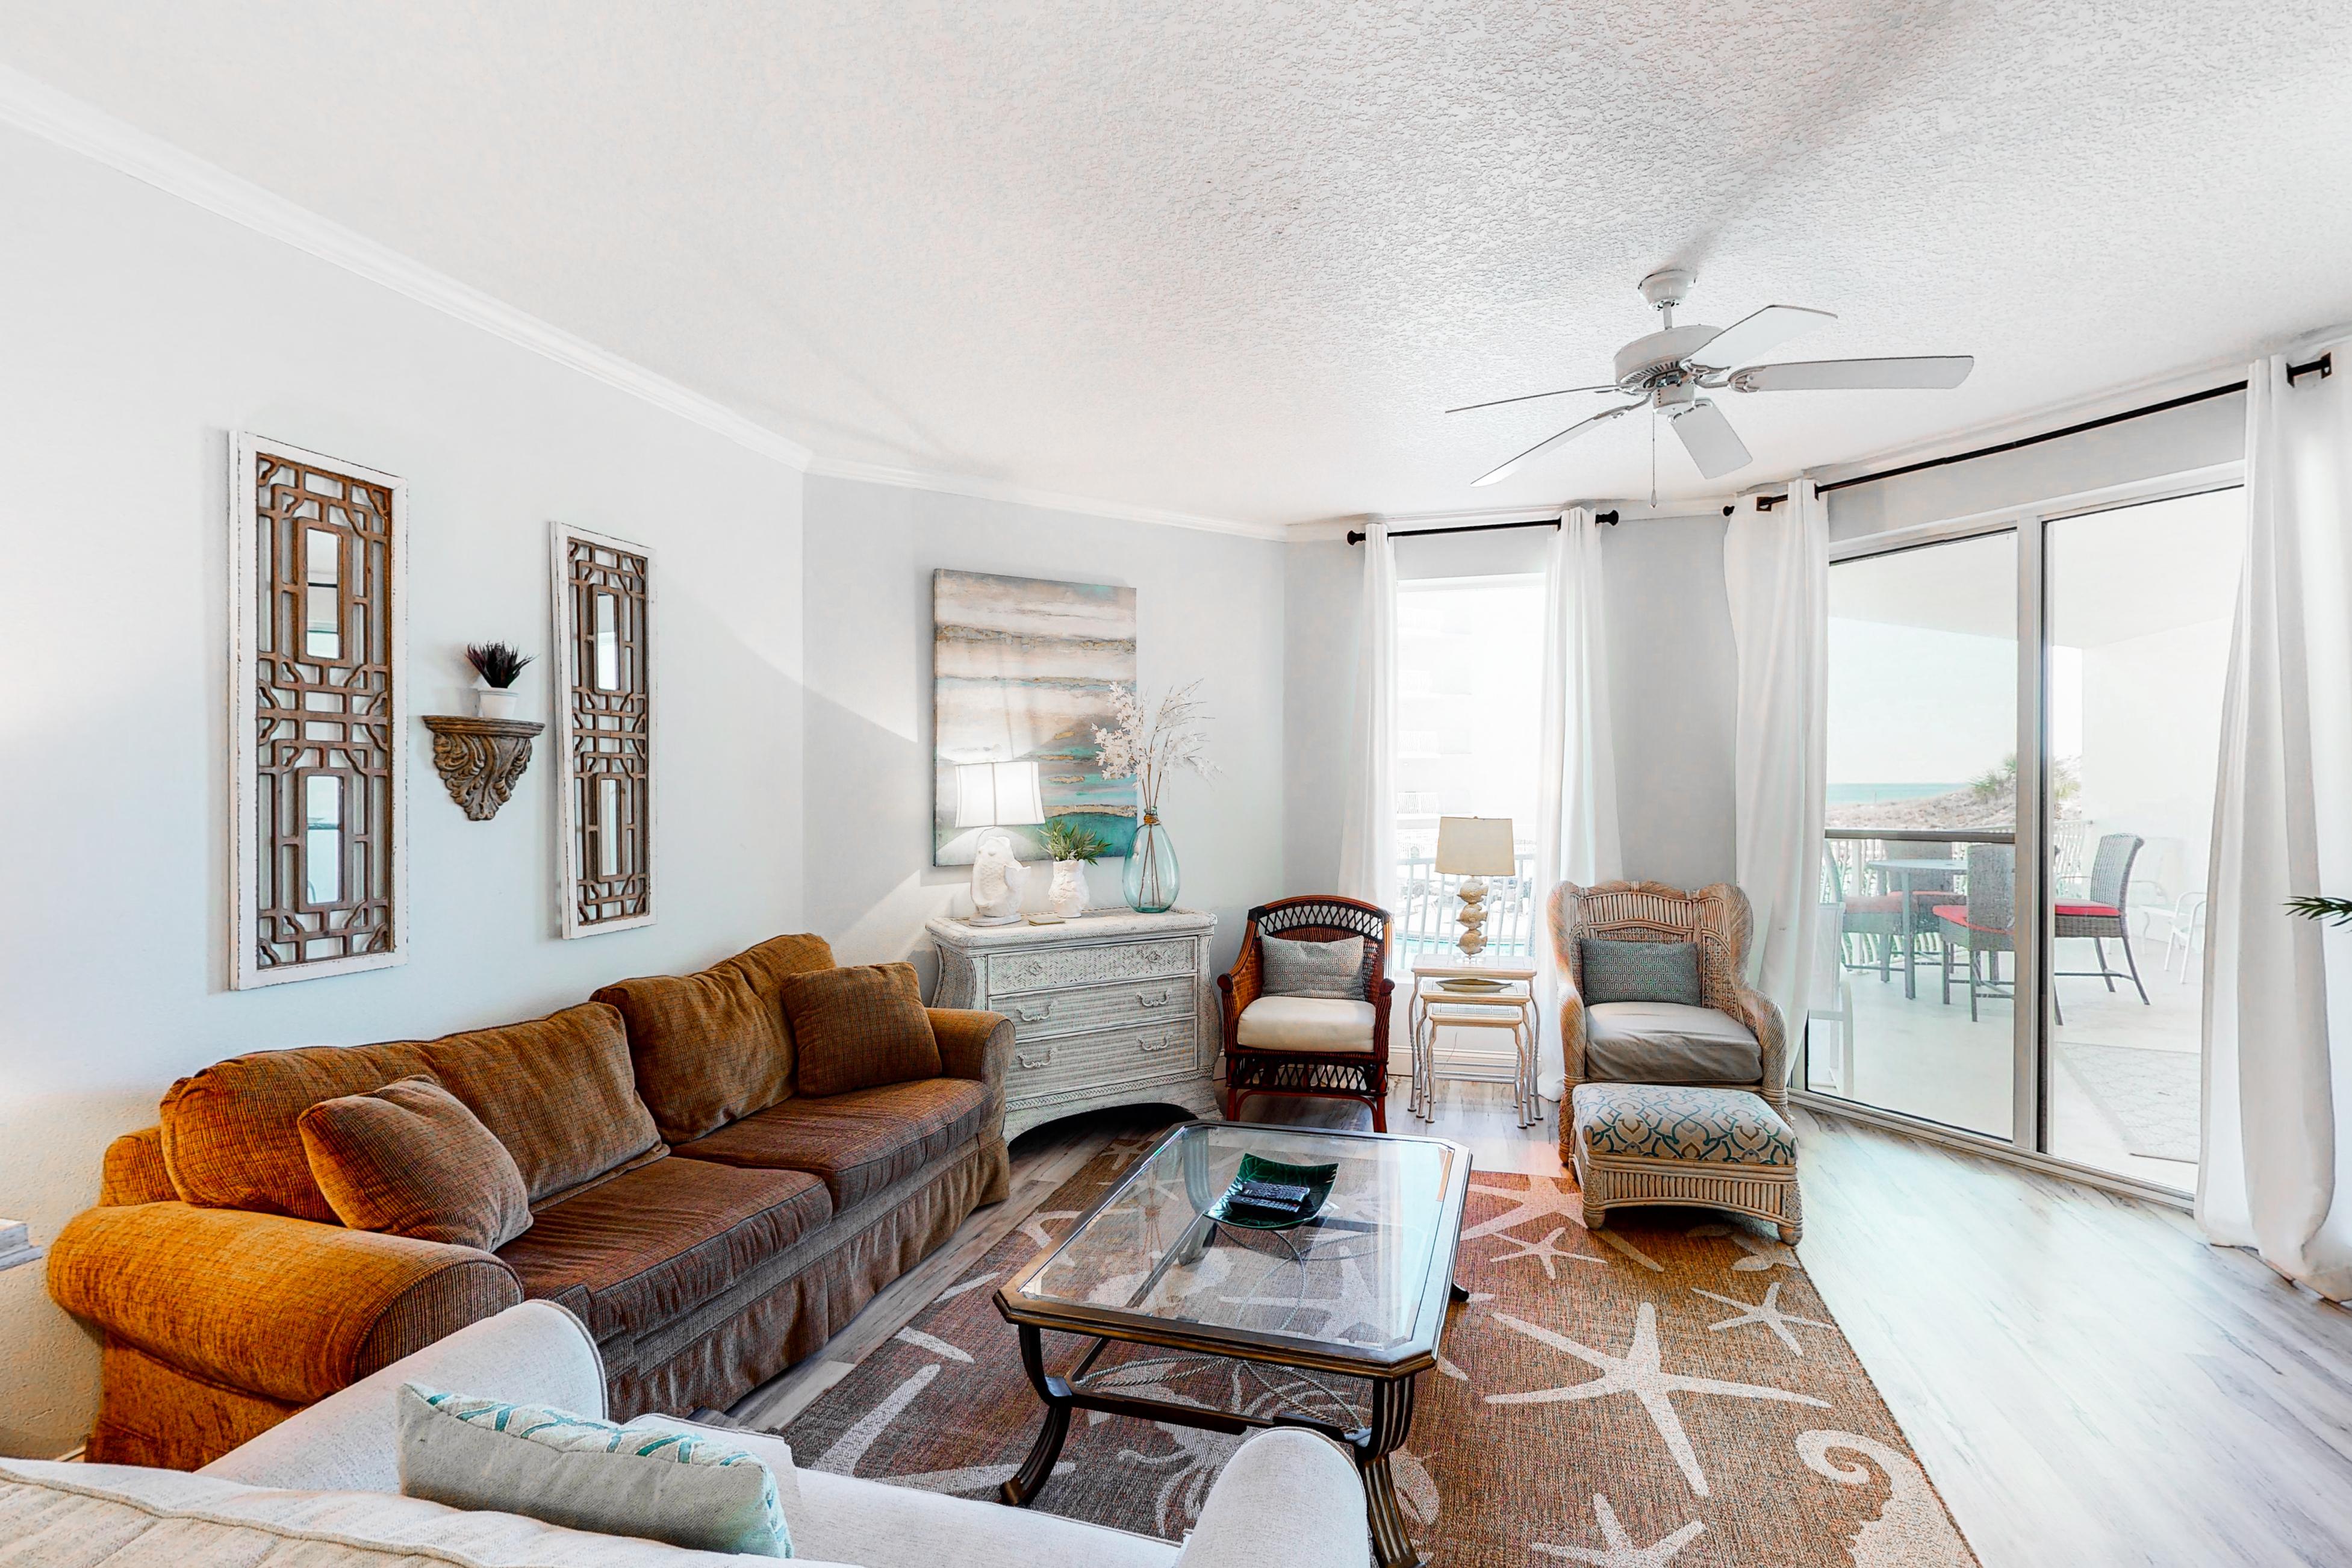 Property Image 1 - Dunes of Seagrove B101